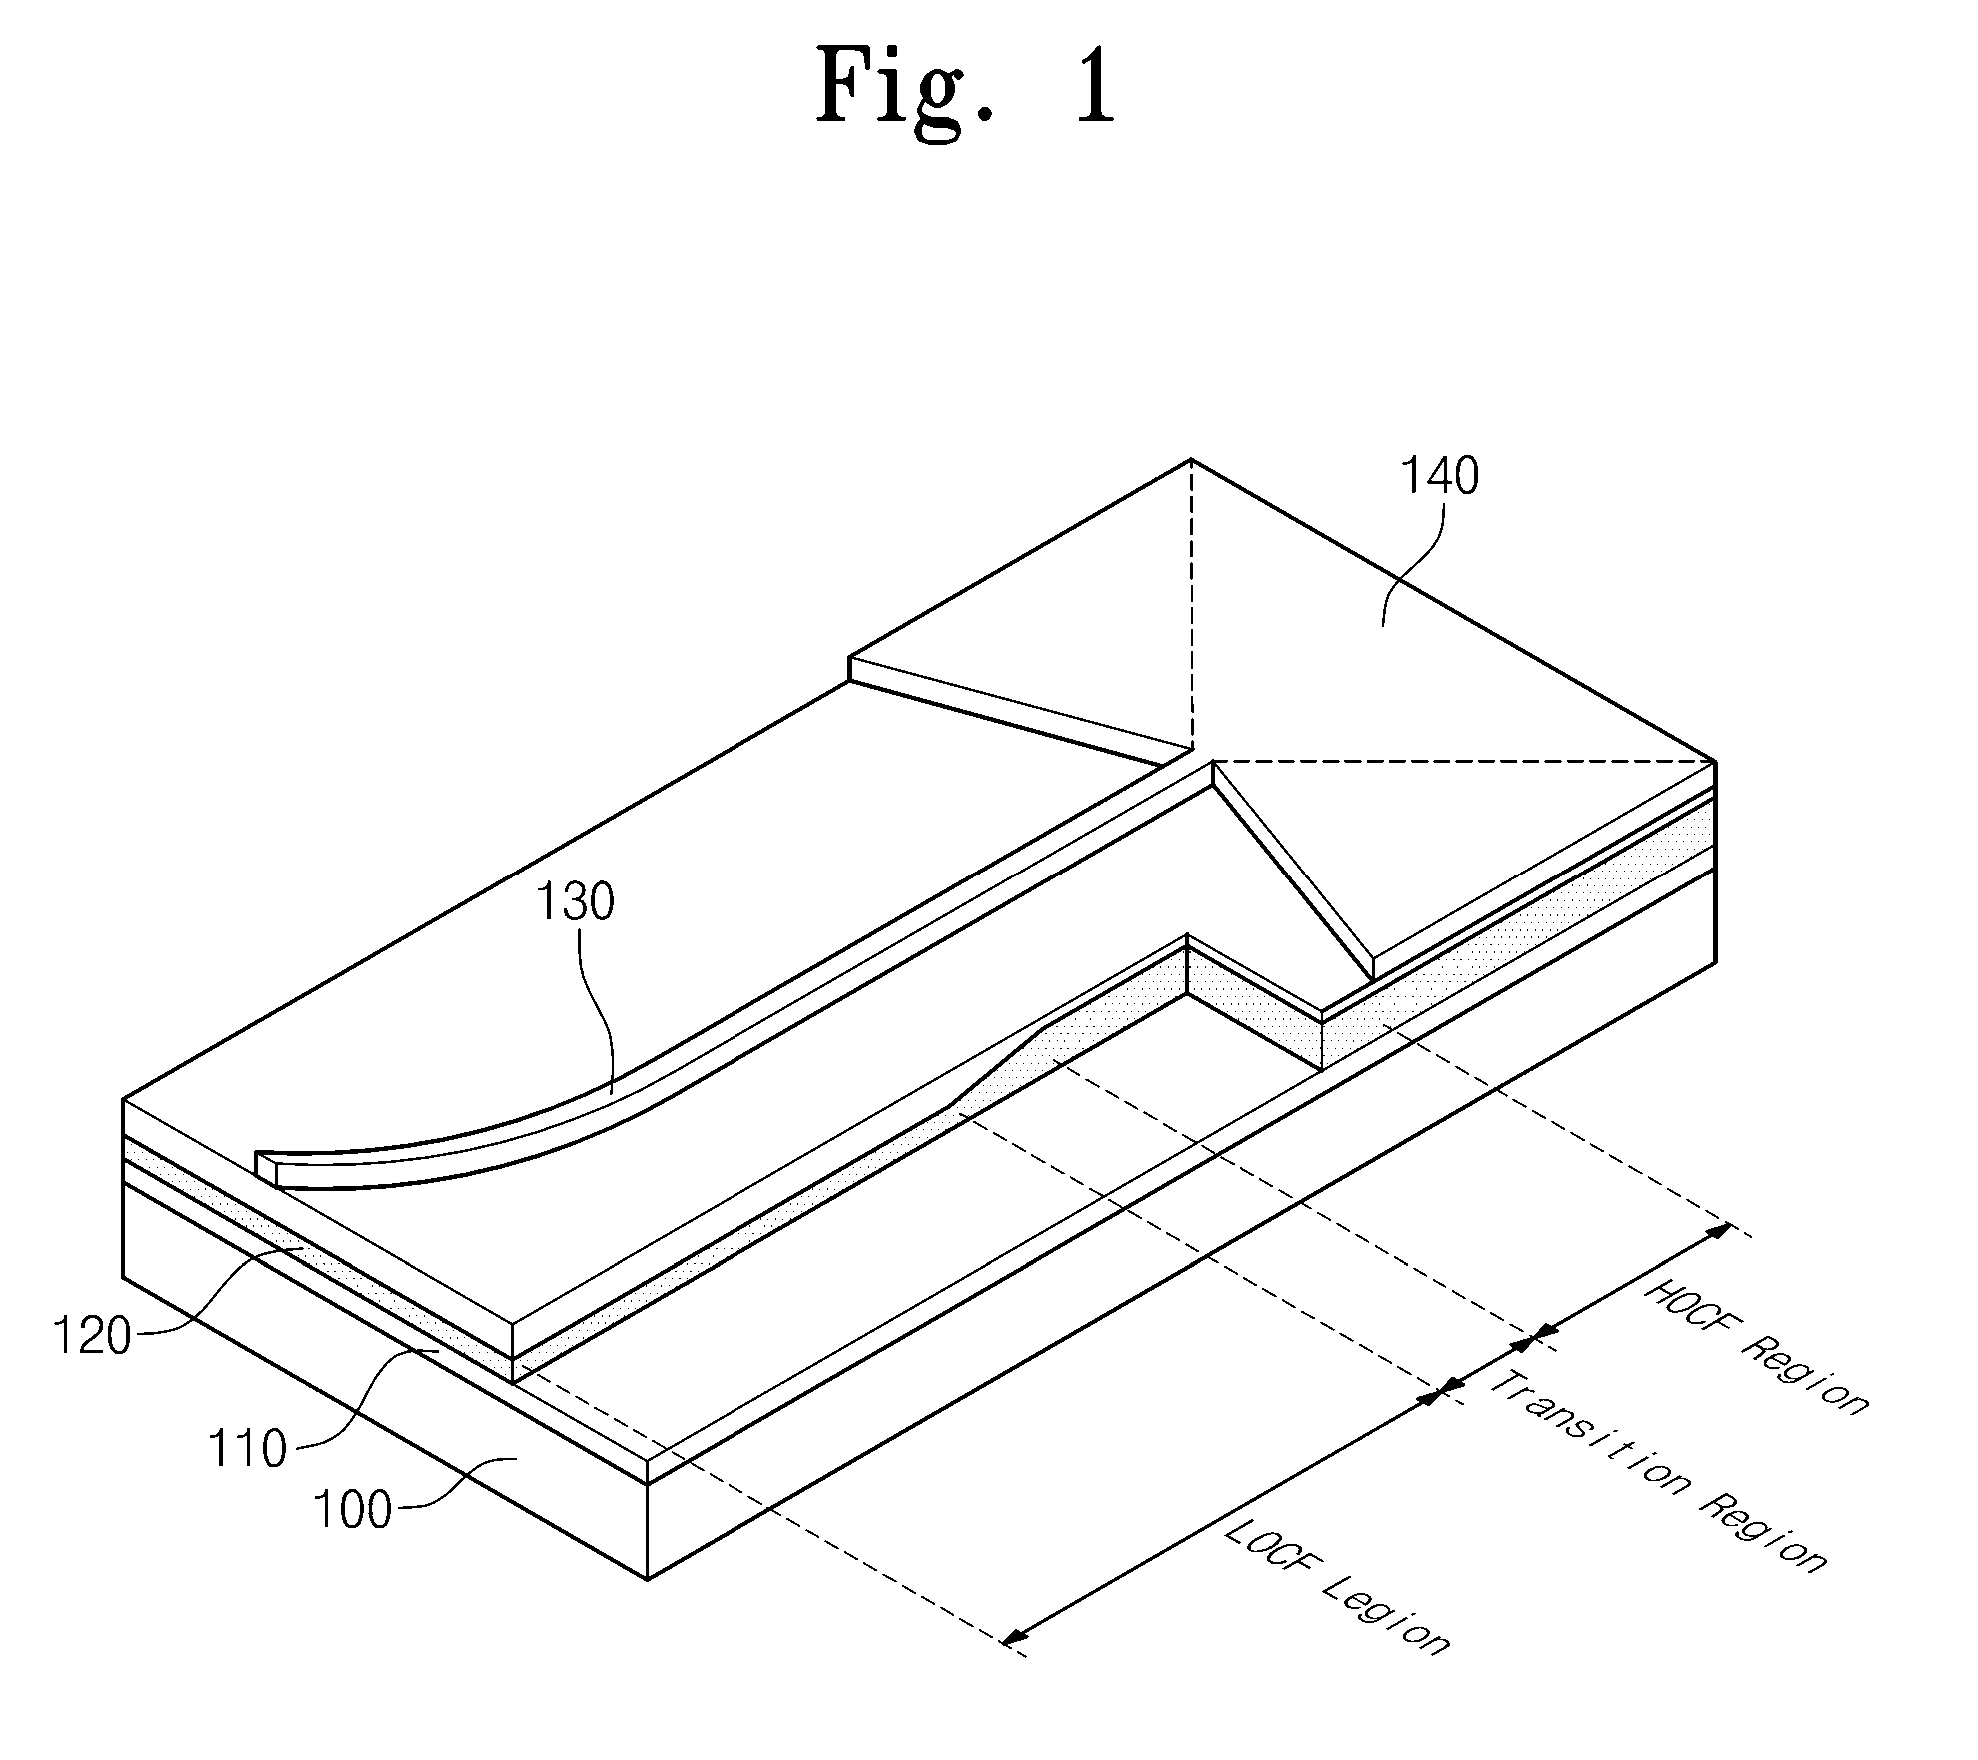 High-power, broad-band, superluminescent diode and method of fabricating the same